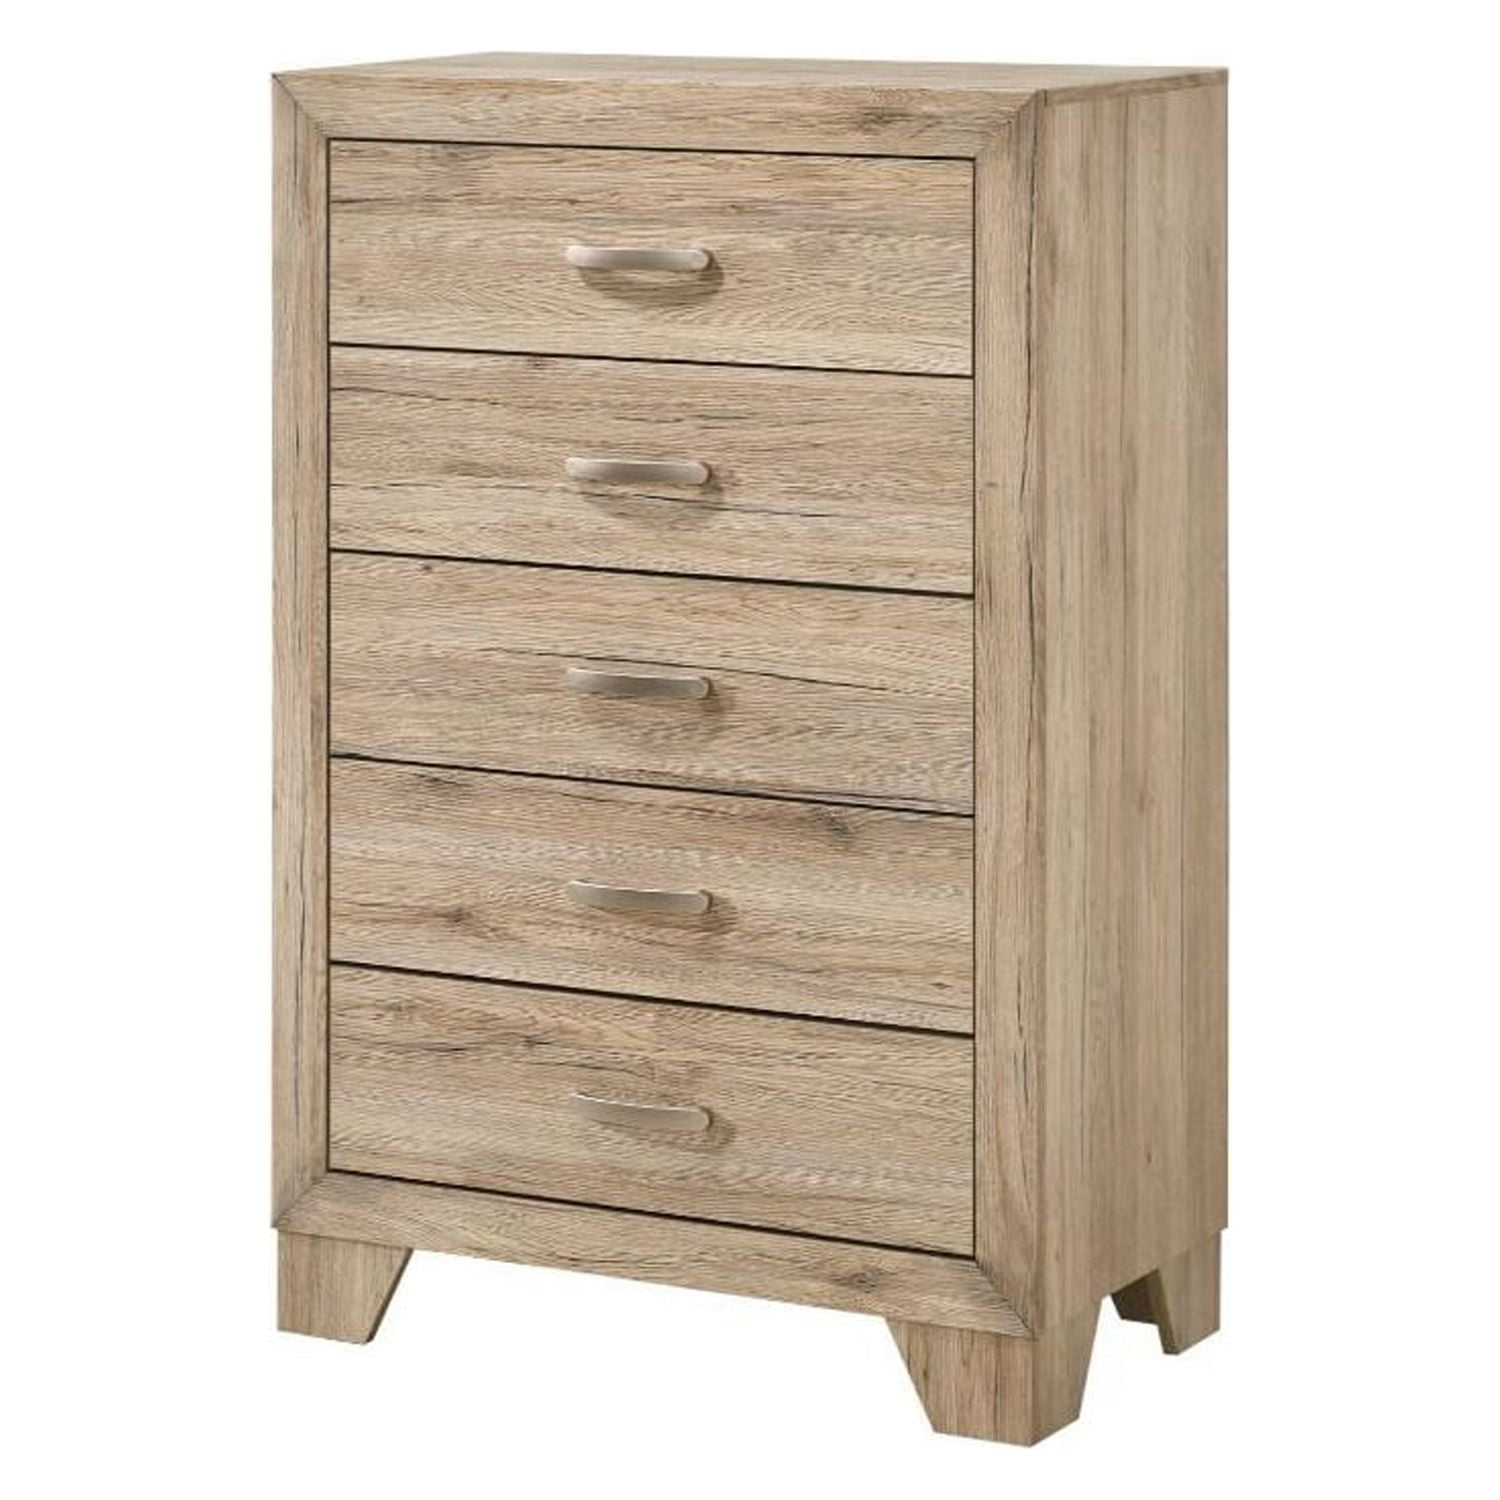 Picture of Acme Furniture 28046 32 x 16 x 44 in. Miquell Chest, Natural